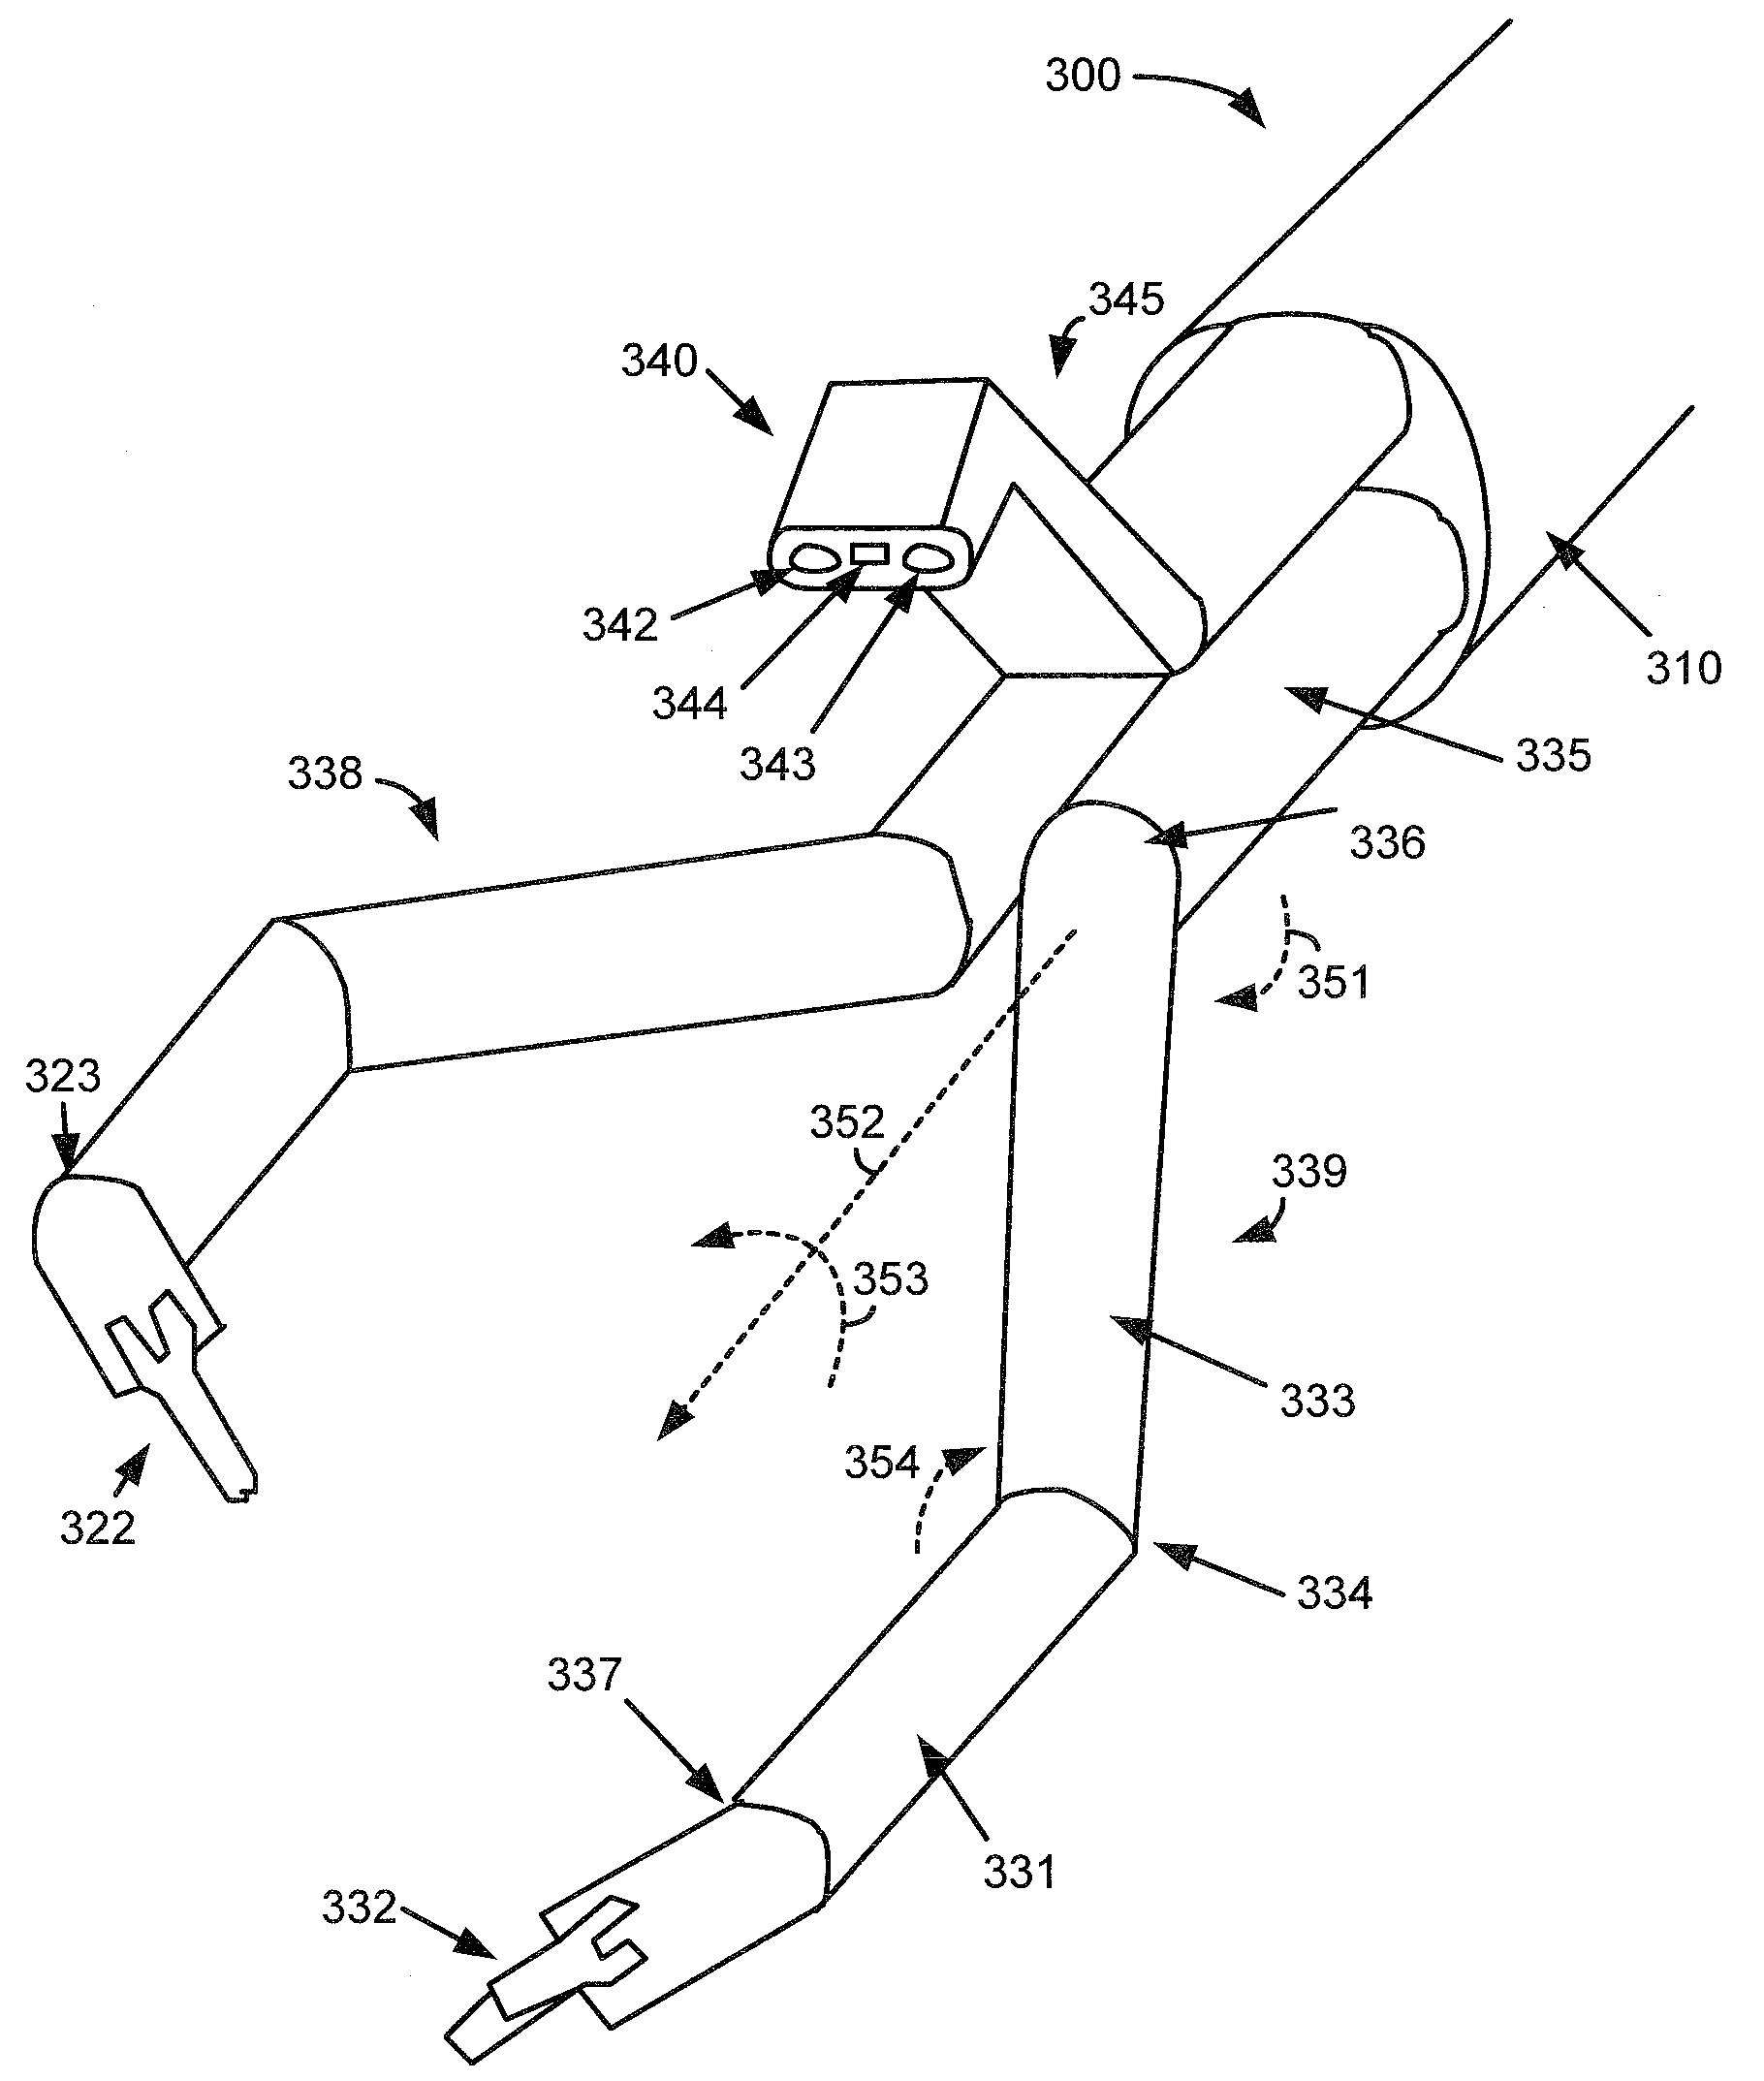 Extendable suction surface for bracing medial devices during robotically assisted medical procedures